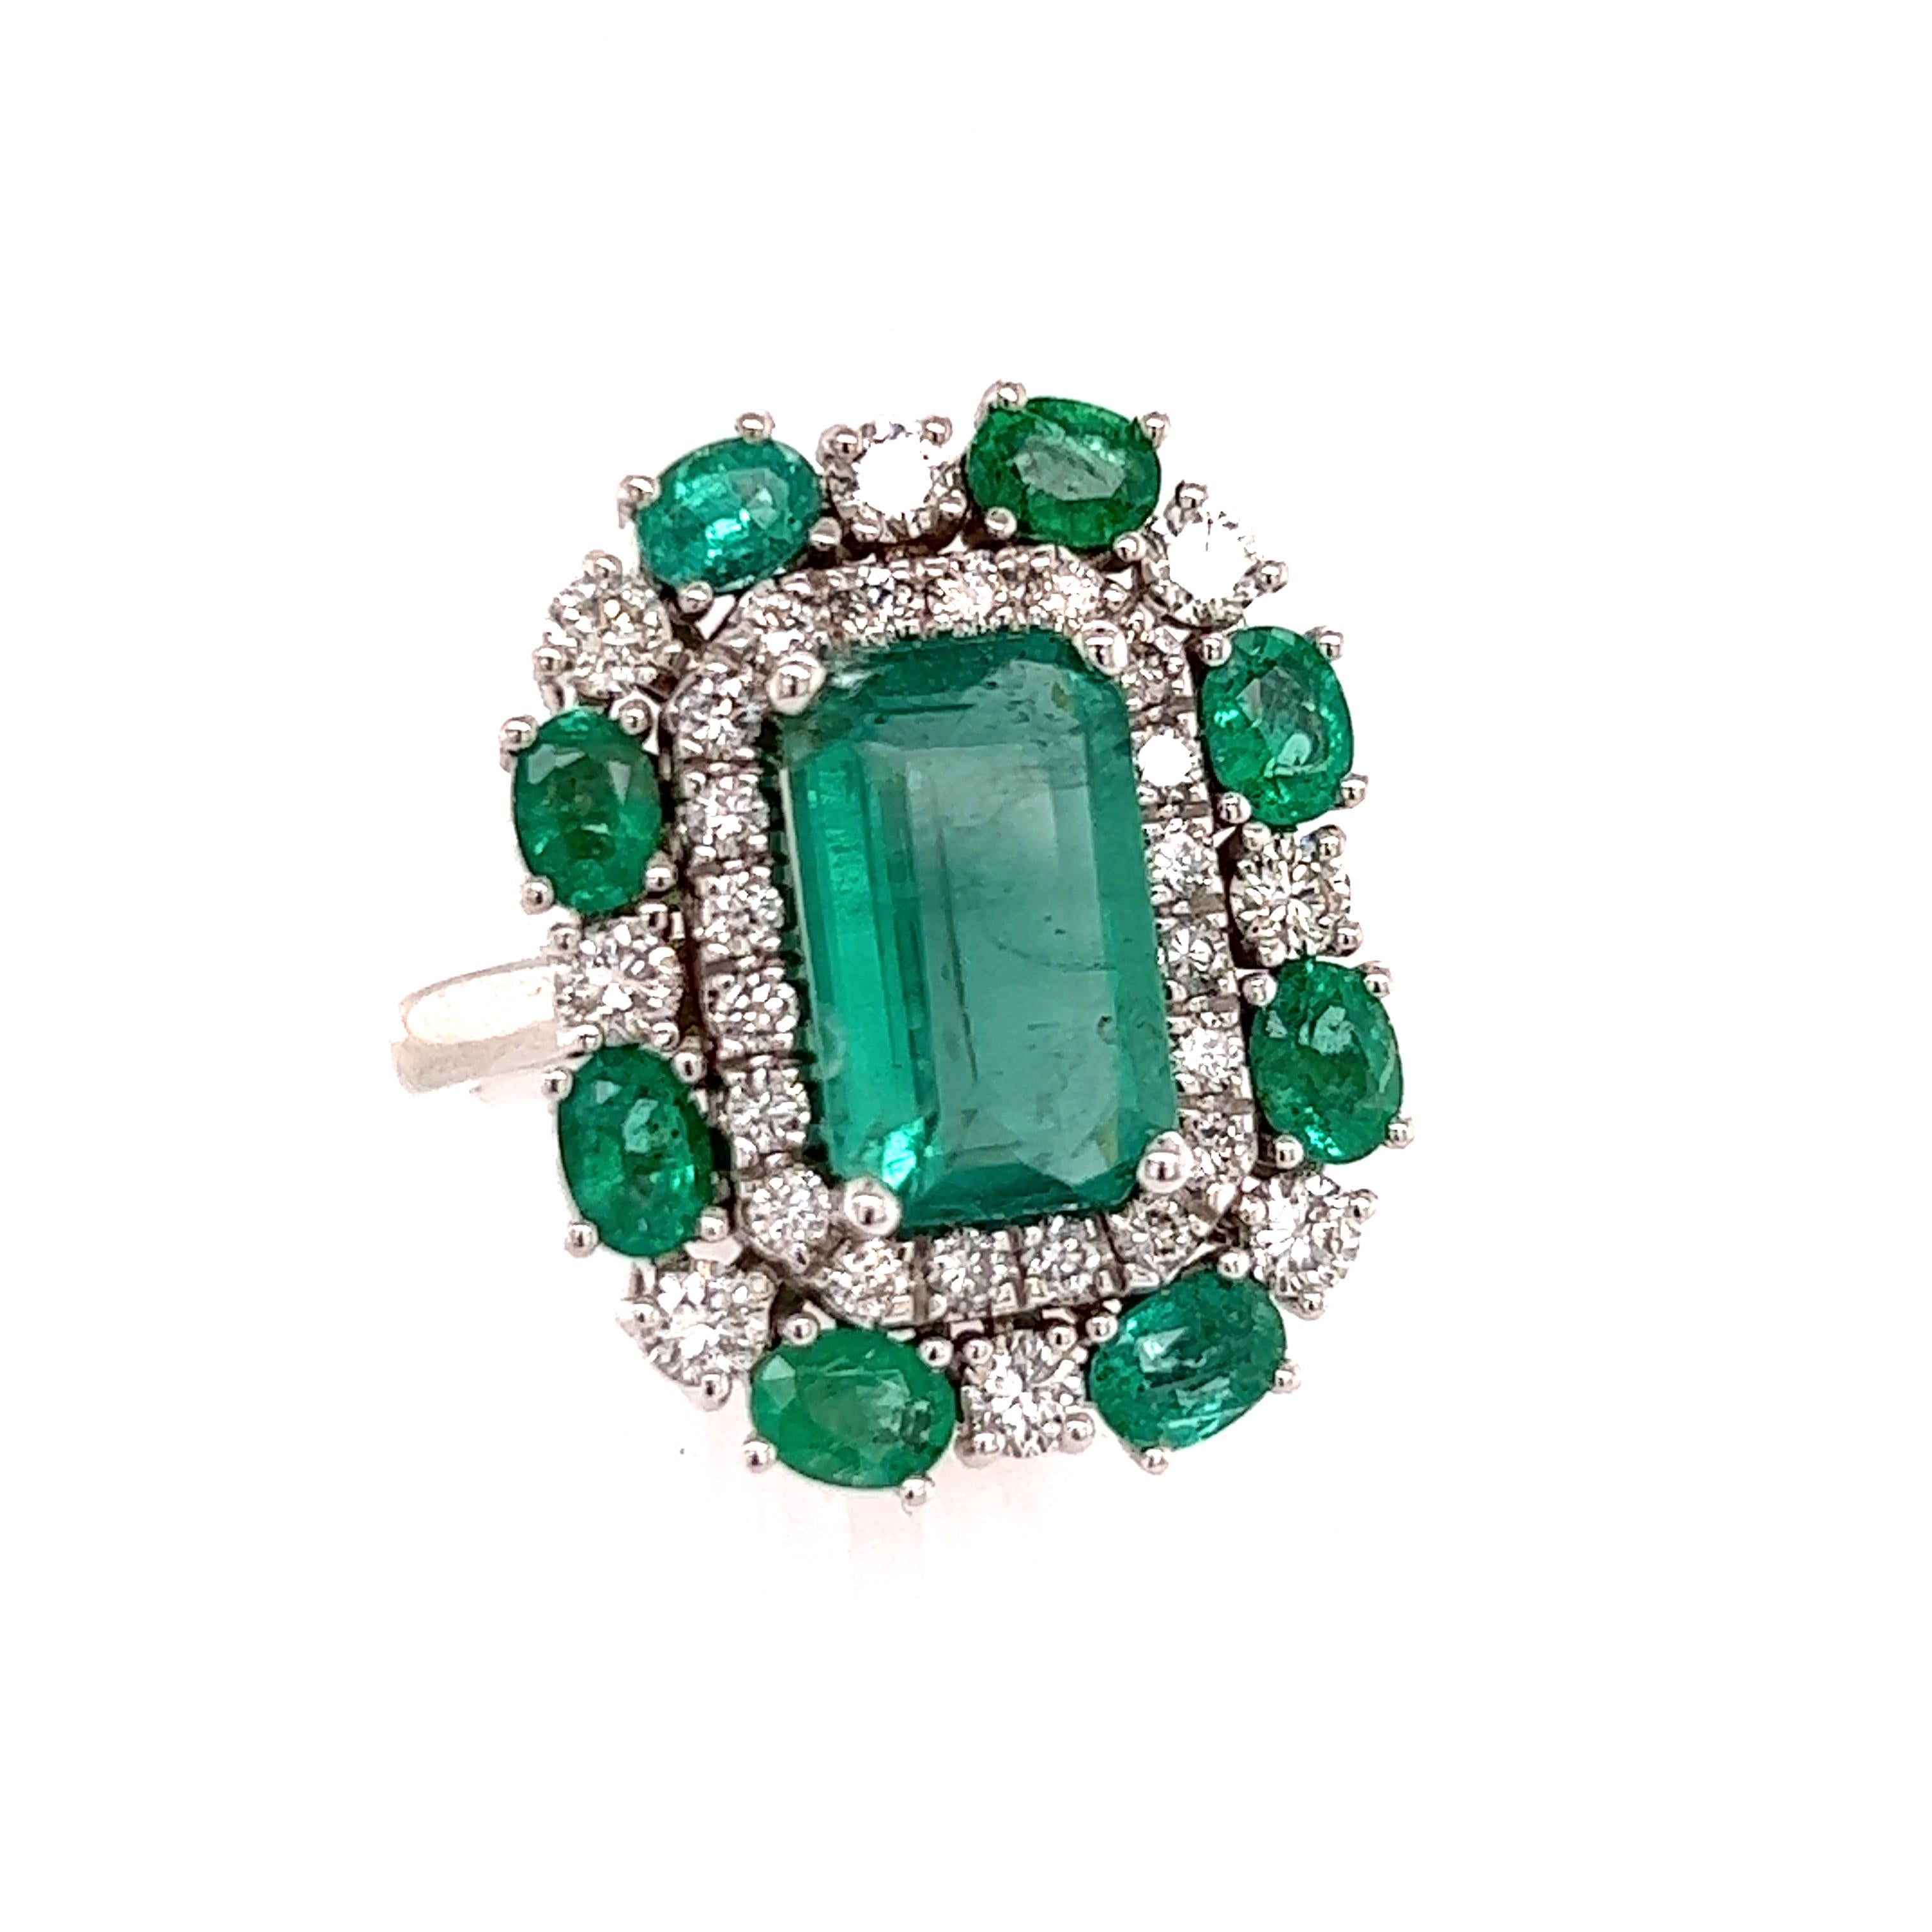 Natural Emerald Diamond Ring 6.5 14k Gold 4.52 TCW GIA Certified For Sale 4